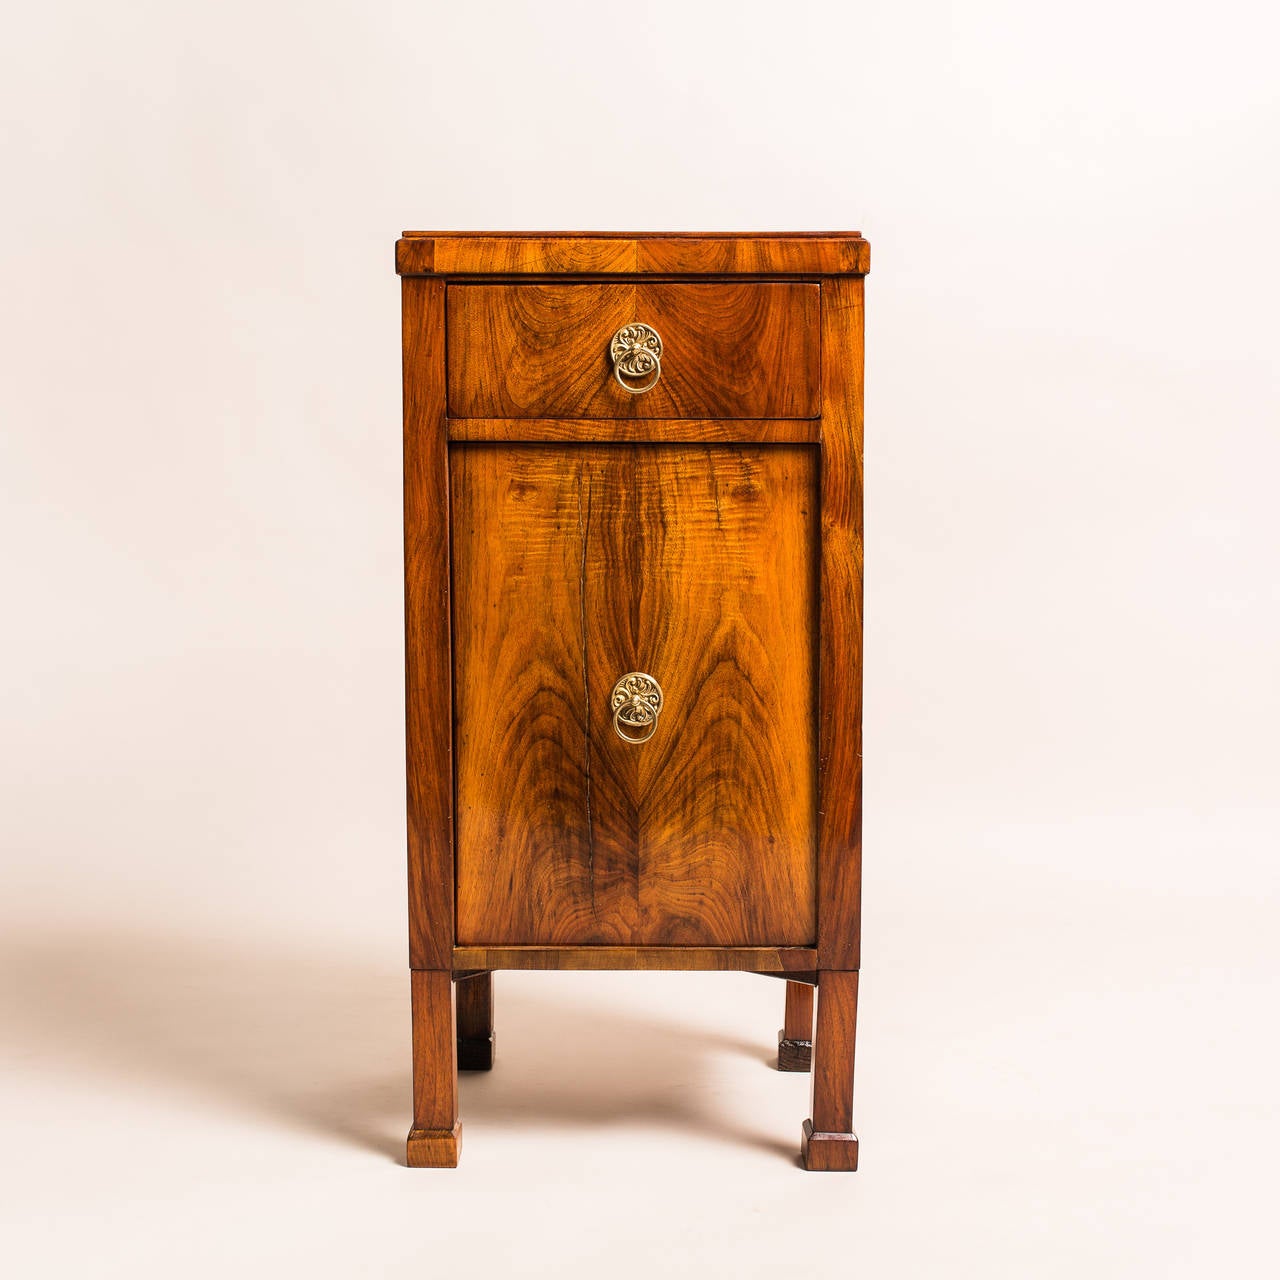 Built in Vienna, Austria, circa 1830, this simple yet elegant small pillar cabinet or nightstand has all the characteristics of the Biedermeier period. Its clean lines and minimal ornamentation add to its charm of expertly crafted spruce wood with a